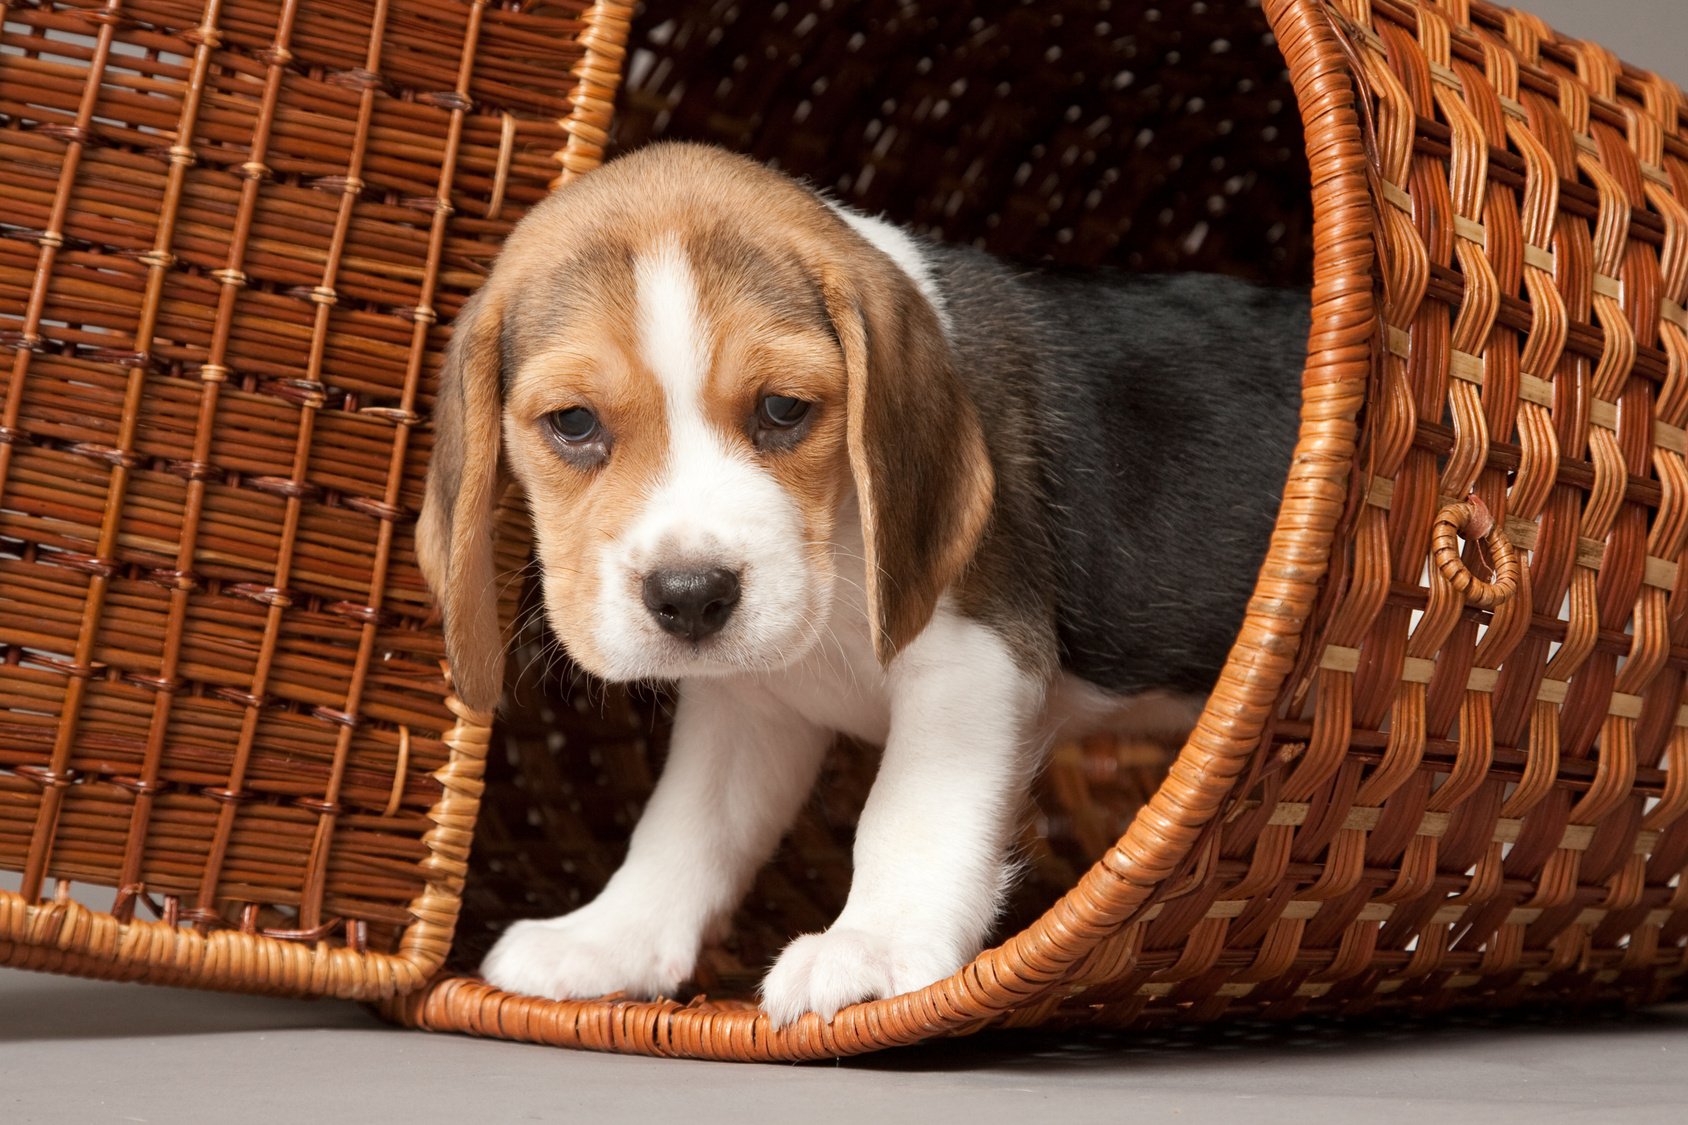 How to Prepare for the Arrival of Your New Puppy